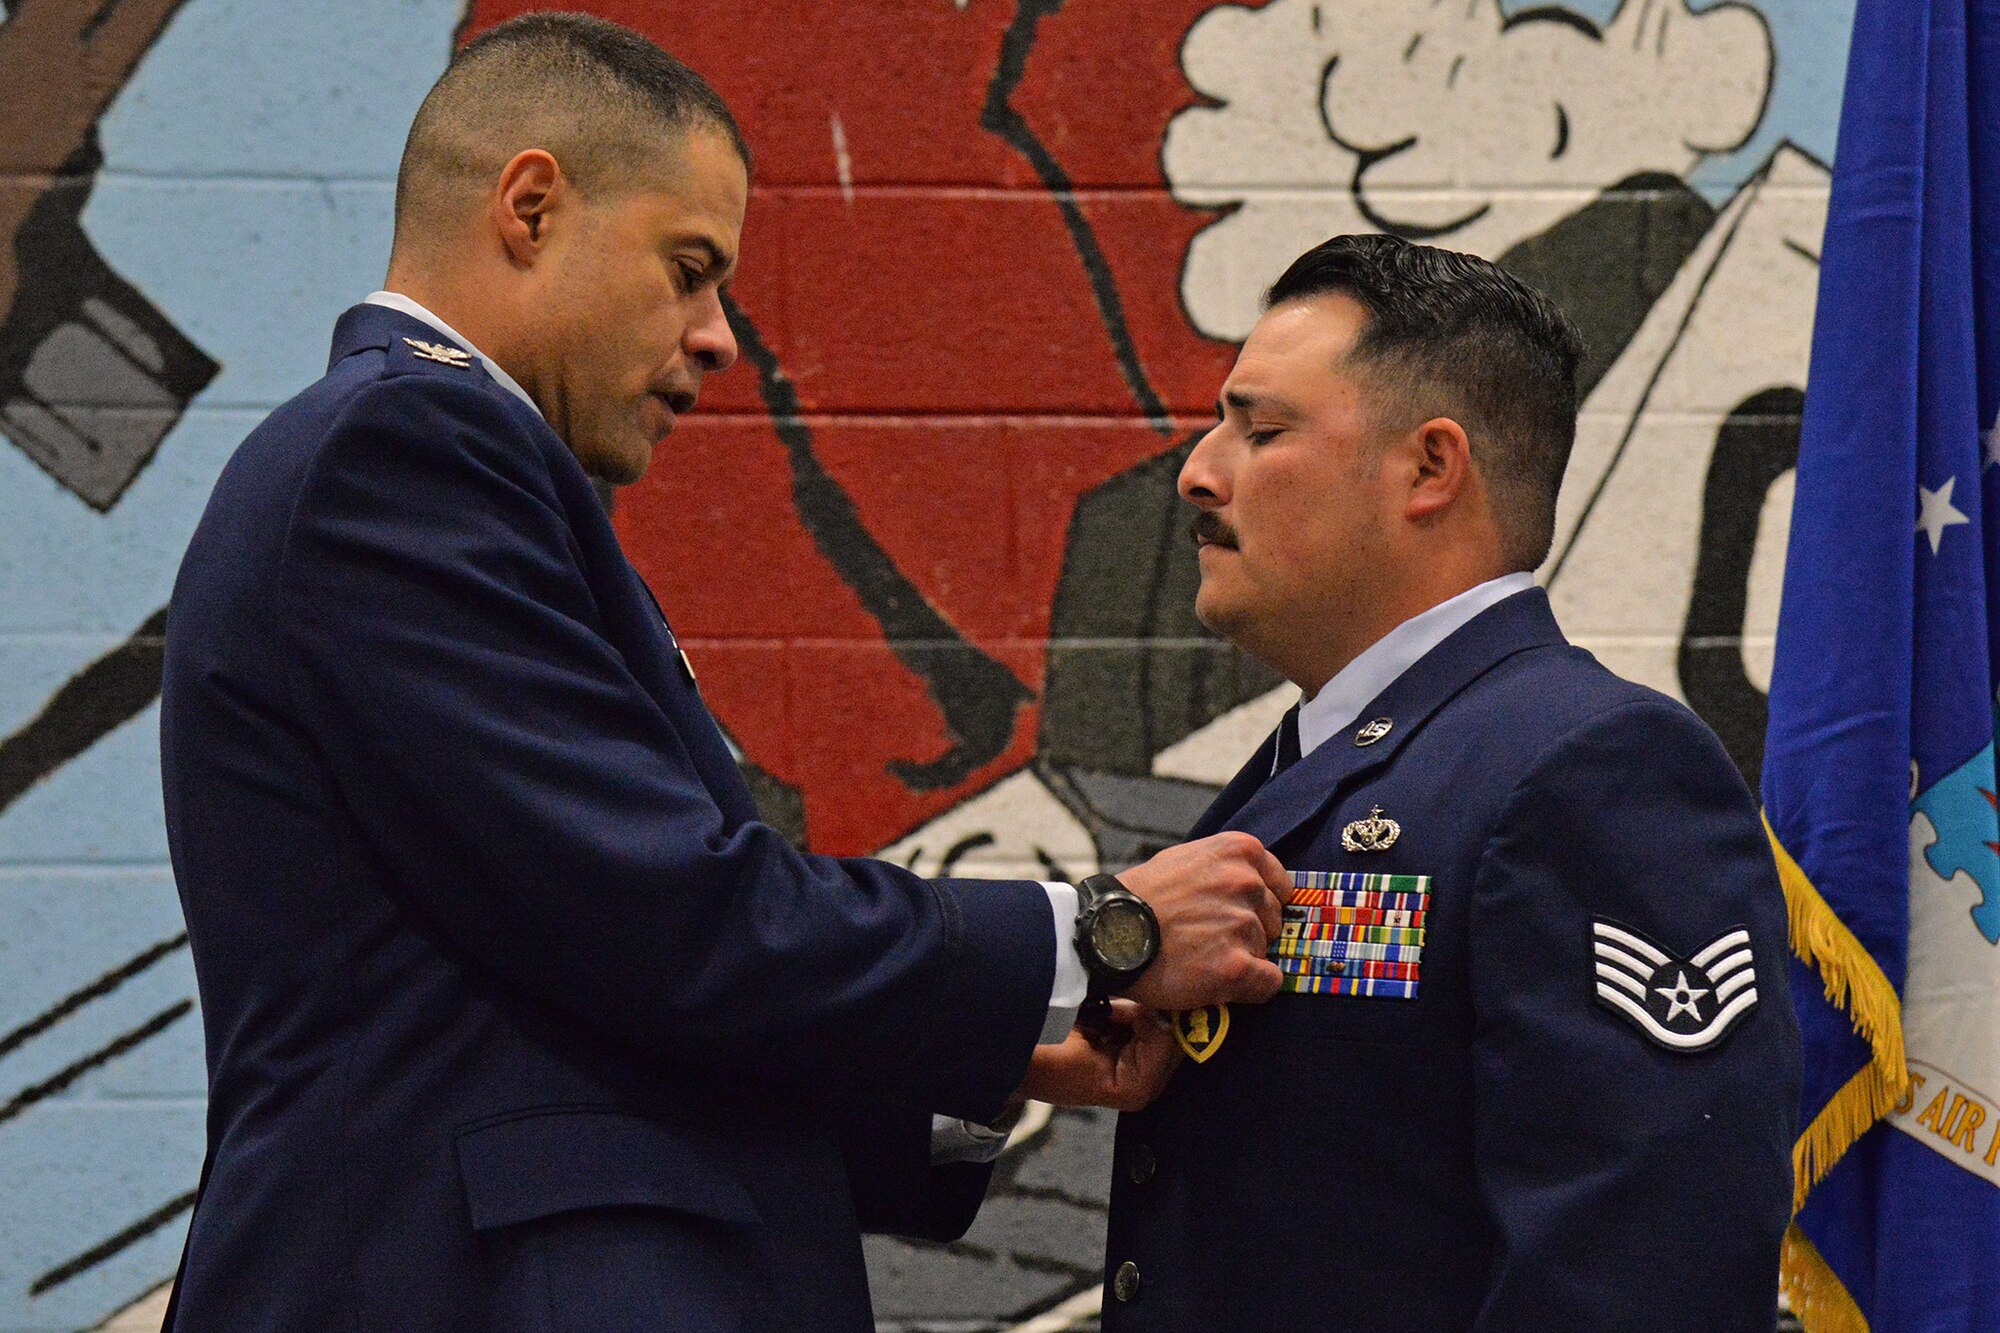 Col. Jose Rivera, 819th RED HORSE Squadron commander, left, pins a Purple Heart medal on Staff Sgt. Joseph Dickison, 819th RHS heating, ventilation and air conditioning technician, during a ceremony at the Air Fields hangar Dec. 9, 2016, at Malmstrom Air Force Base, Mont. Dickison was awarded the Purple Heart for combat wounds received in Afghanistan in July 2009. (U.S. Air Force photo/Airman 1st Class Daniel Brosam)